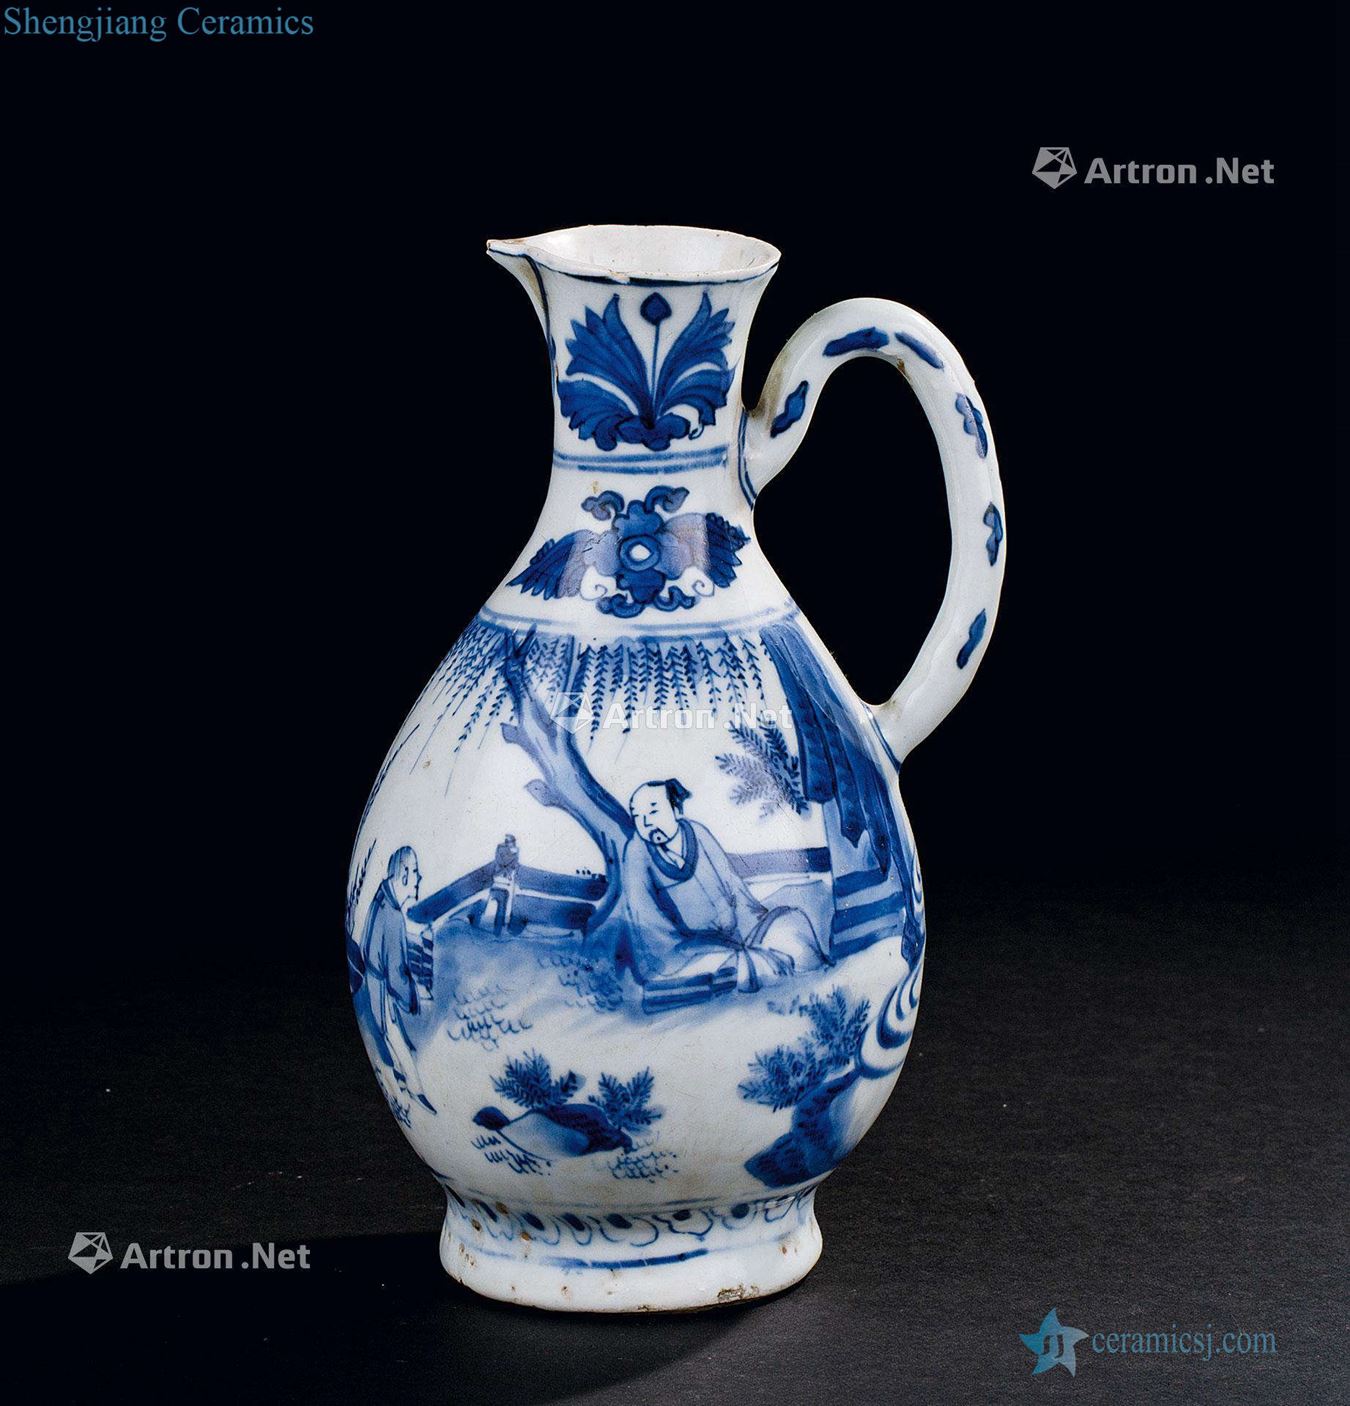 In the Ming dynasty (1368-1644) blue and white high and grain to water the flowers